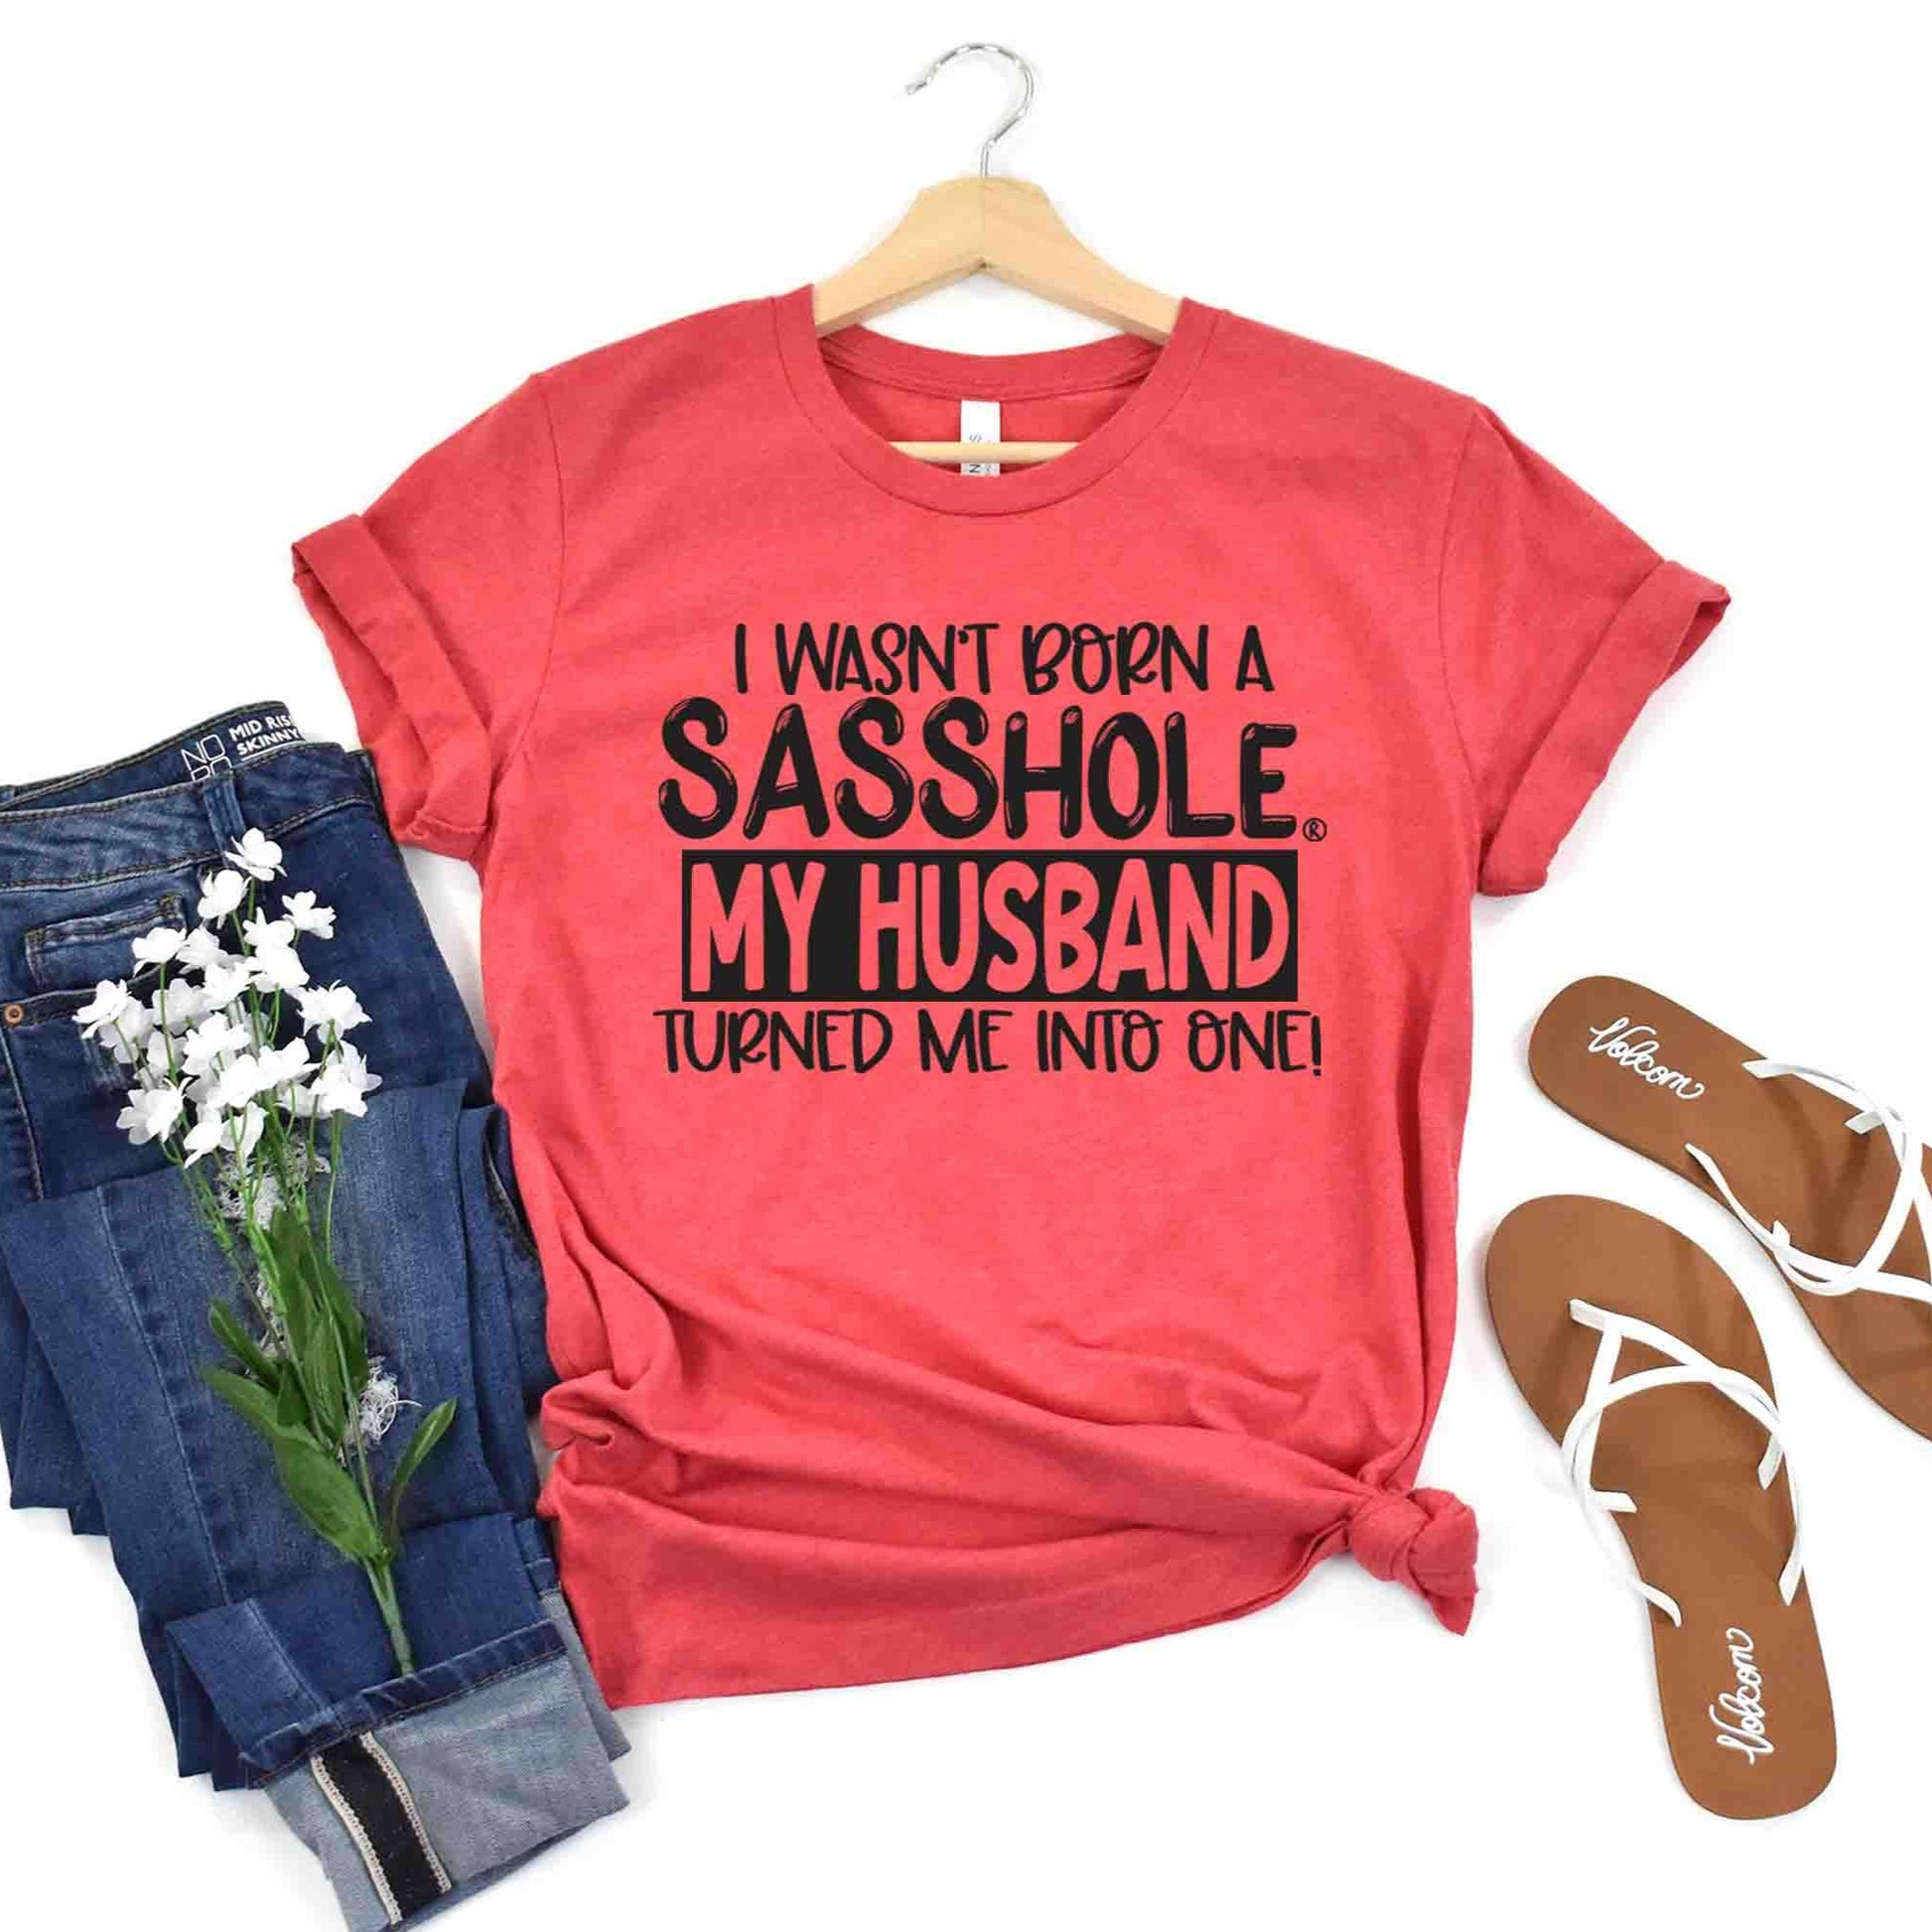 Women's Clothing, witty sibling tees for sale, witty sibling t-shirts, witty sibling shirts, witty sibling quotes, witty sibling apparel, witty relationship quotes, witty husband and wife shirts, witty husband and wife quotes, witty husband and wife merchandise, witty husband and wife attire for sale, witty husband and wife attire, witty husband and wife apparel, Unisex, T-shirts, shop witty sibling apparel, shop witty husband and wife apparel, shop laughter-inducing couple shirts for sale